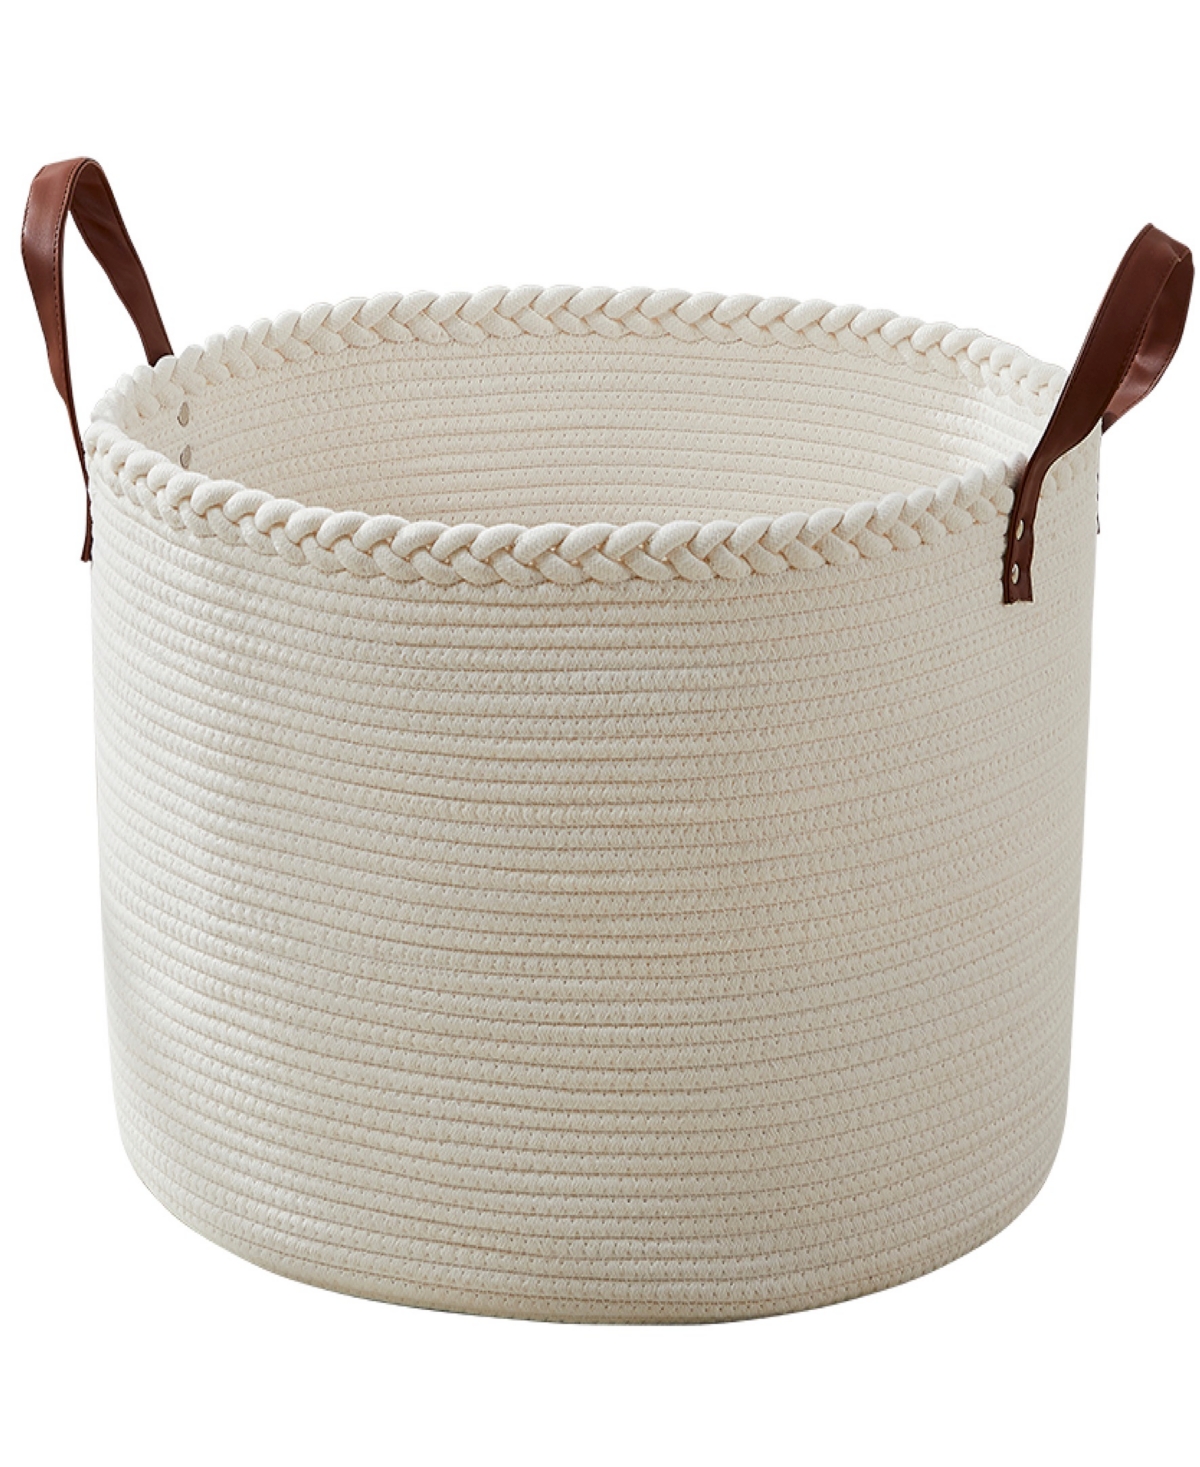 Ornavo Home Extra Large Round Cotton Rope Storage Basket Laundry Hamper With Leather Handles In Cream